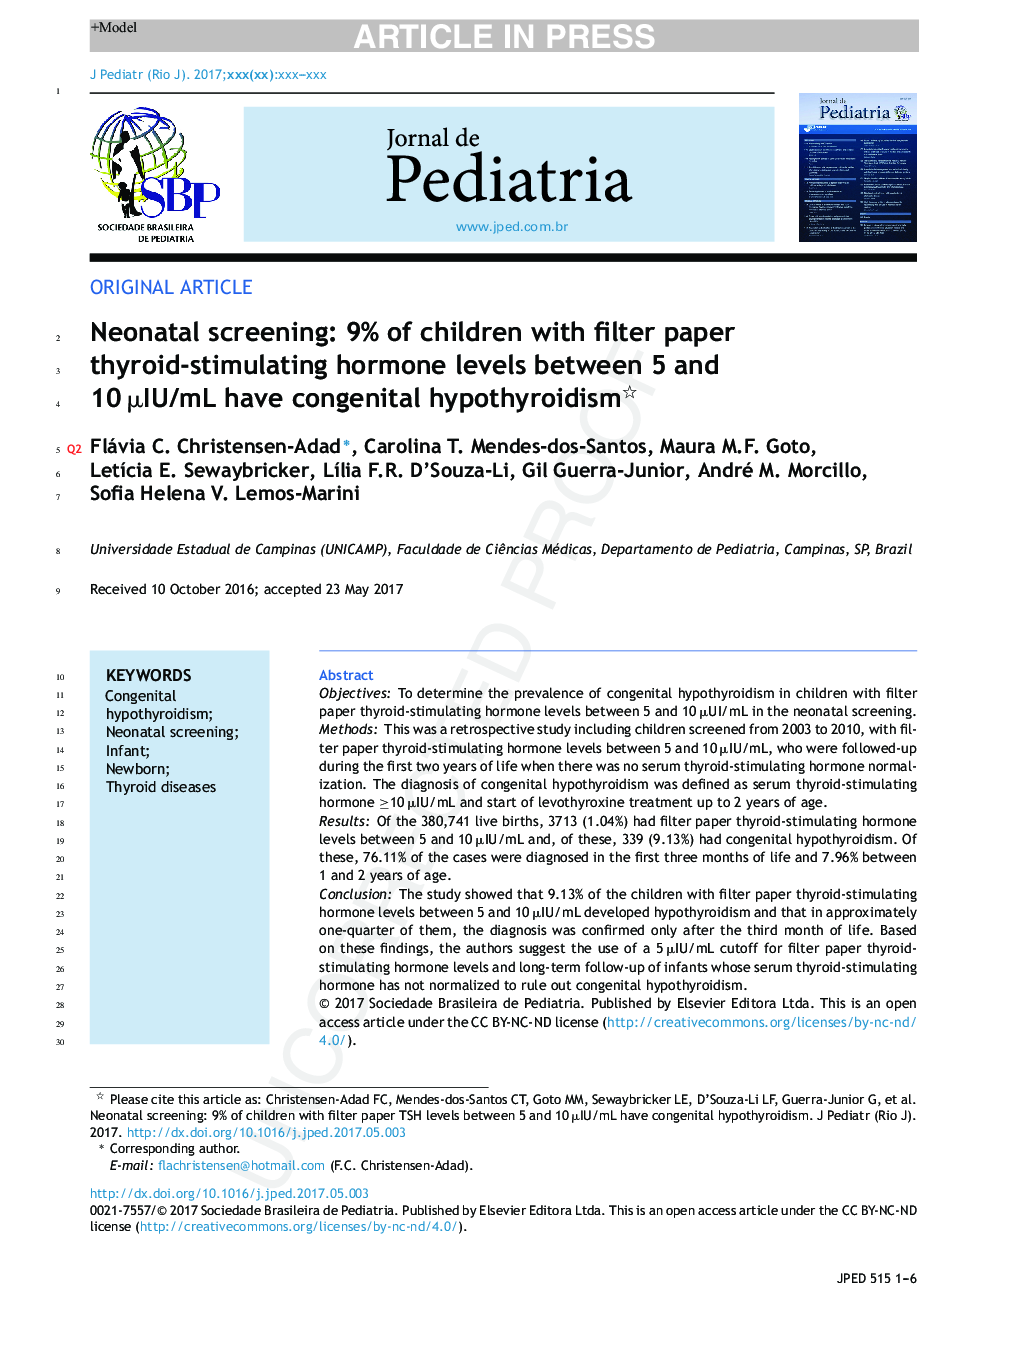 Neonatal screening: 9% of children with filter paper thyroid-stimulating hormone levels between 5 and 10Â Î¼IU/mL have congenital hypothyroidism